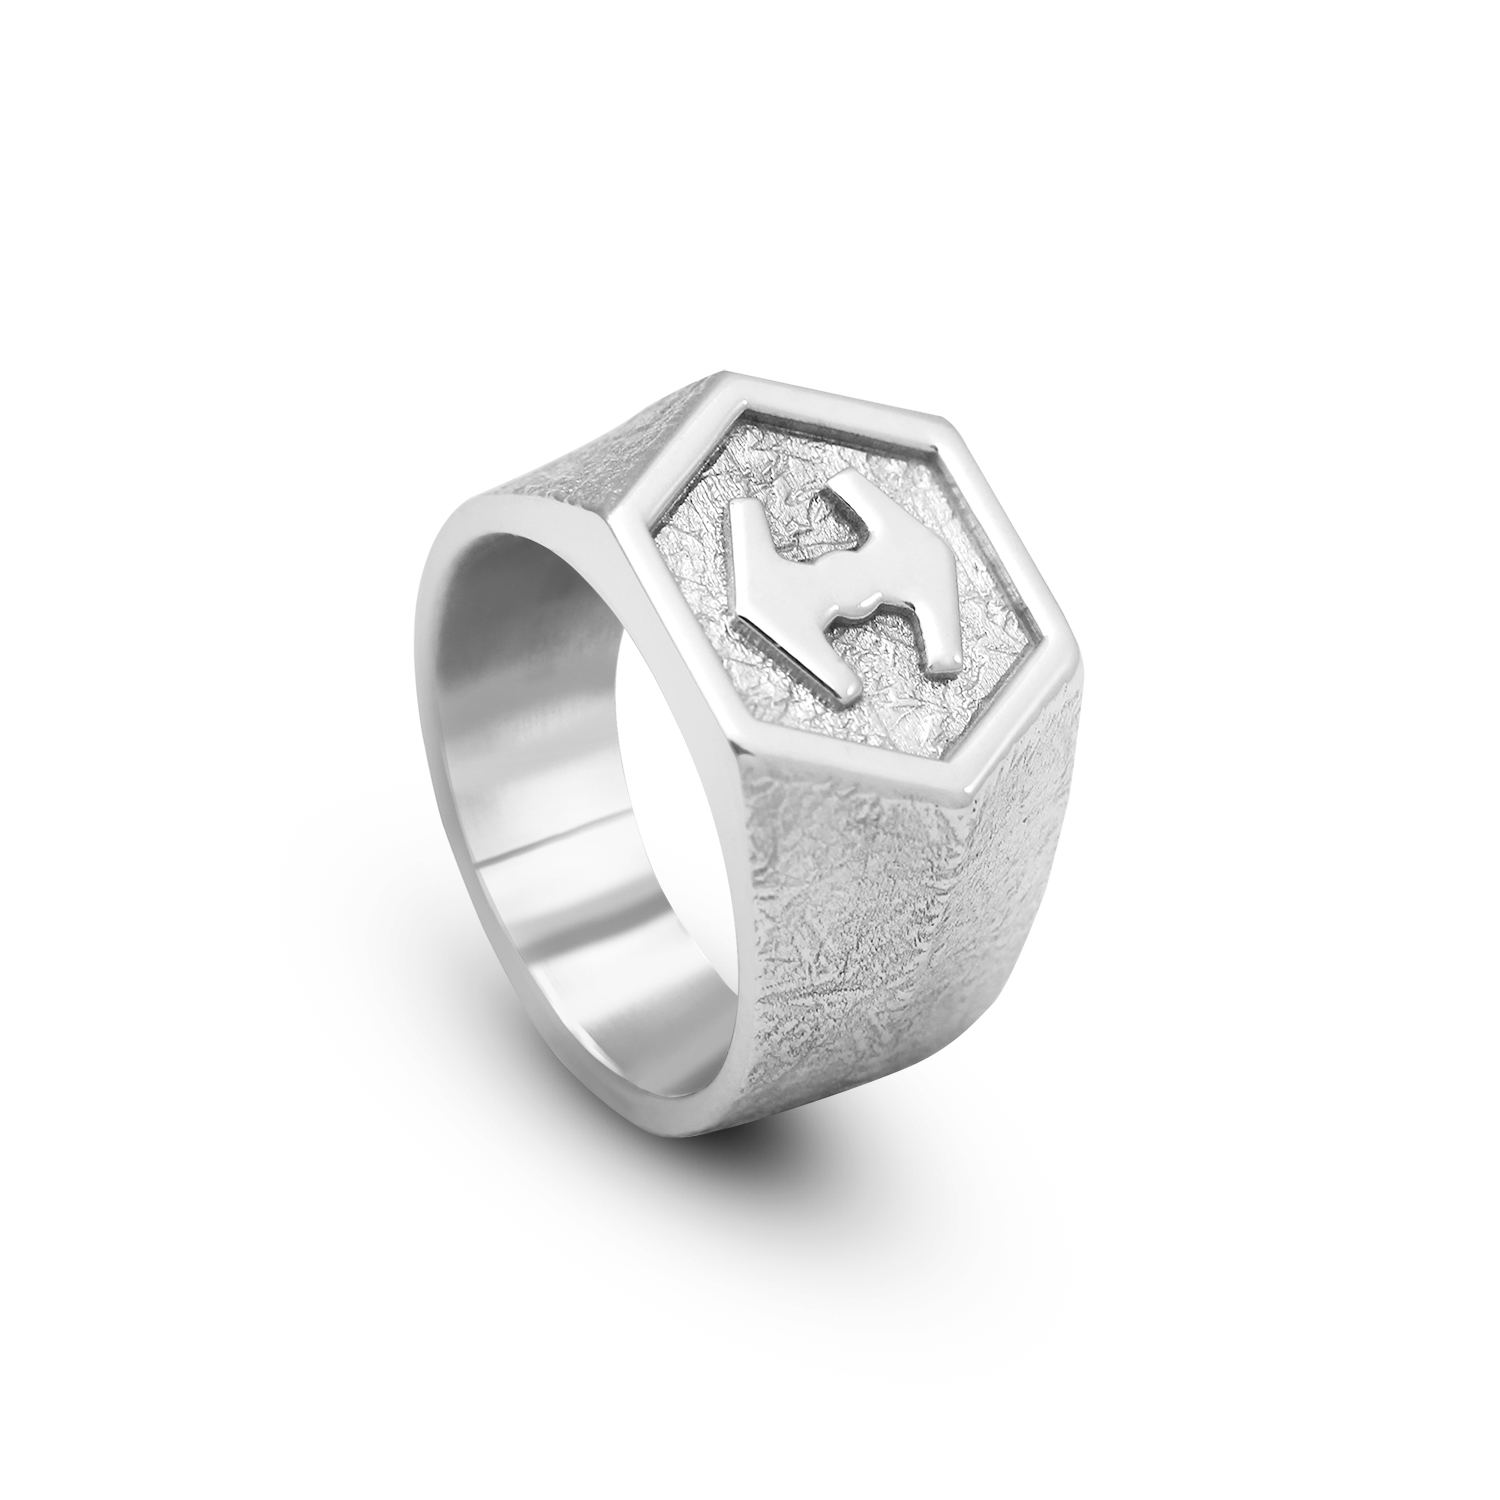 The VIGG ring in sterling silver 935